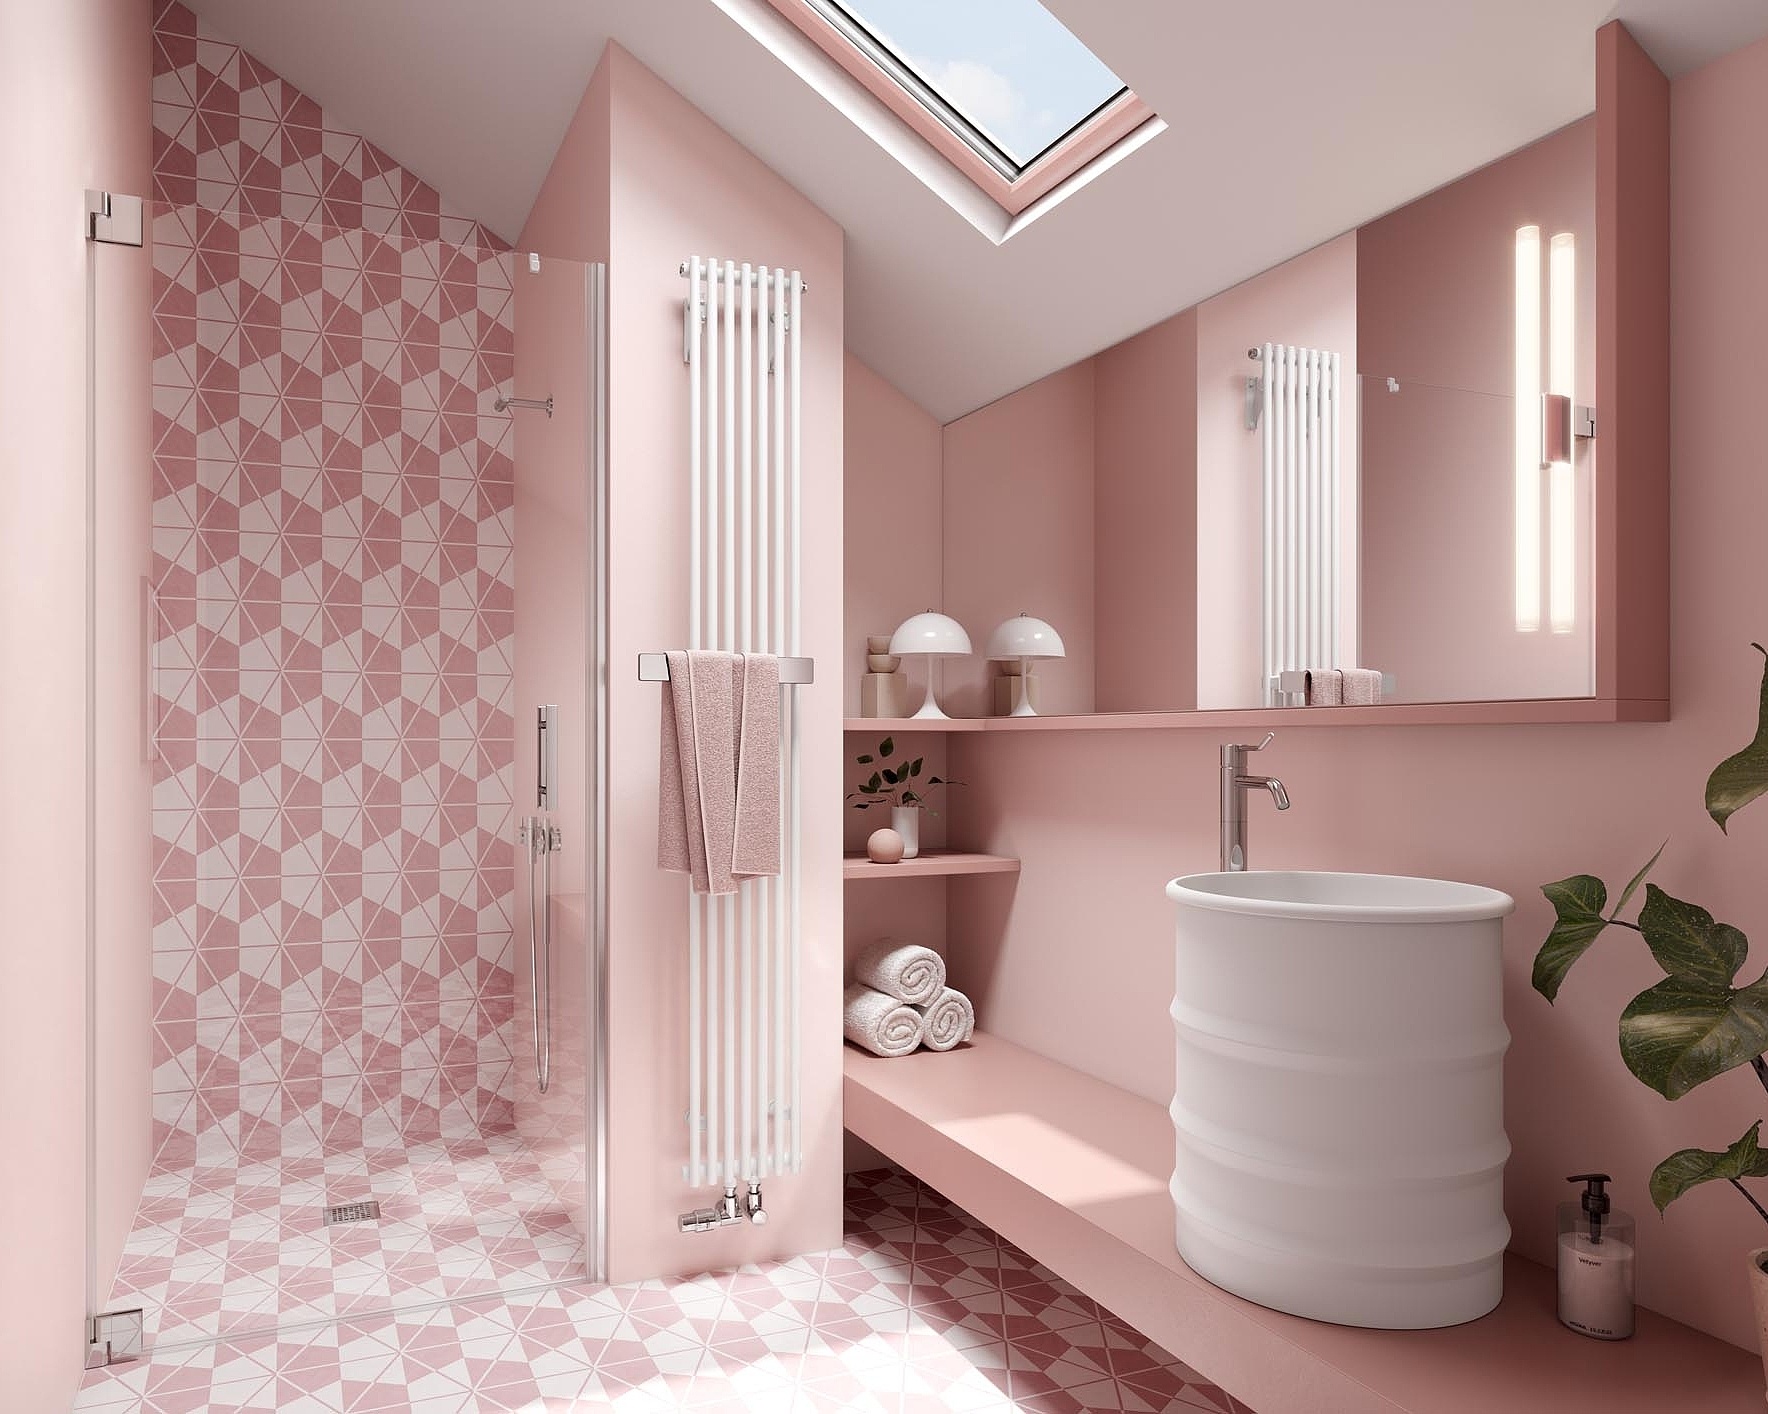 Kermi Pio plus design and bathroom radiators for small bathrooms with limited space.